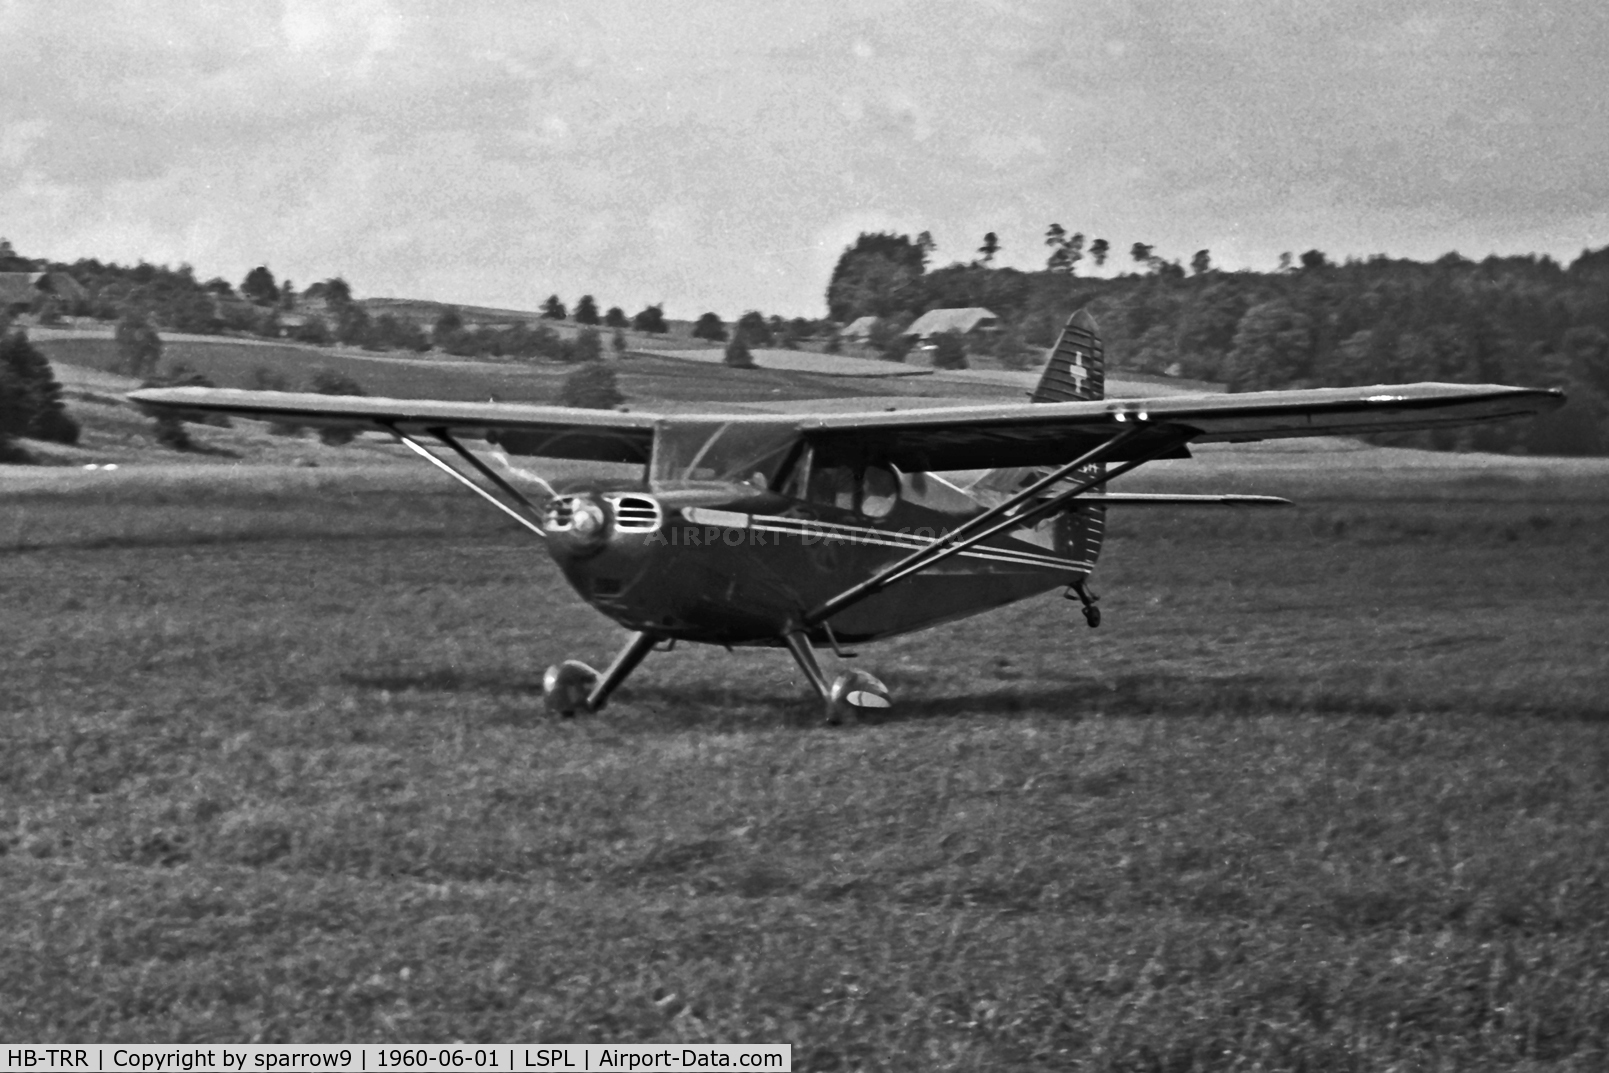 HB-TRR, 1947 Stinson 108-3 Voyager Voyager C/N 108-3920, At Langenthal-Bleienbach airfield in the sixties.